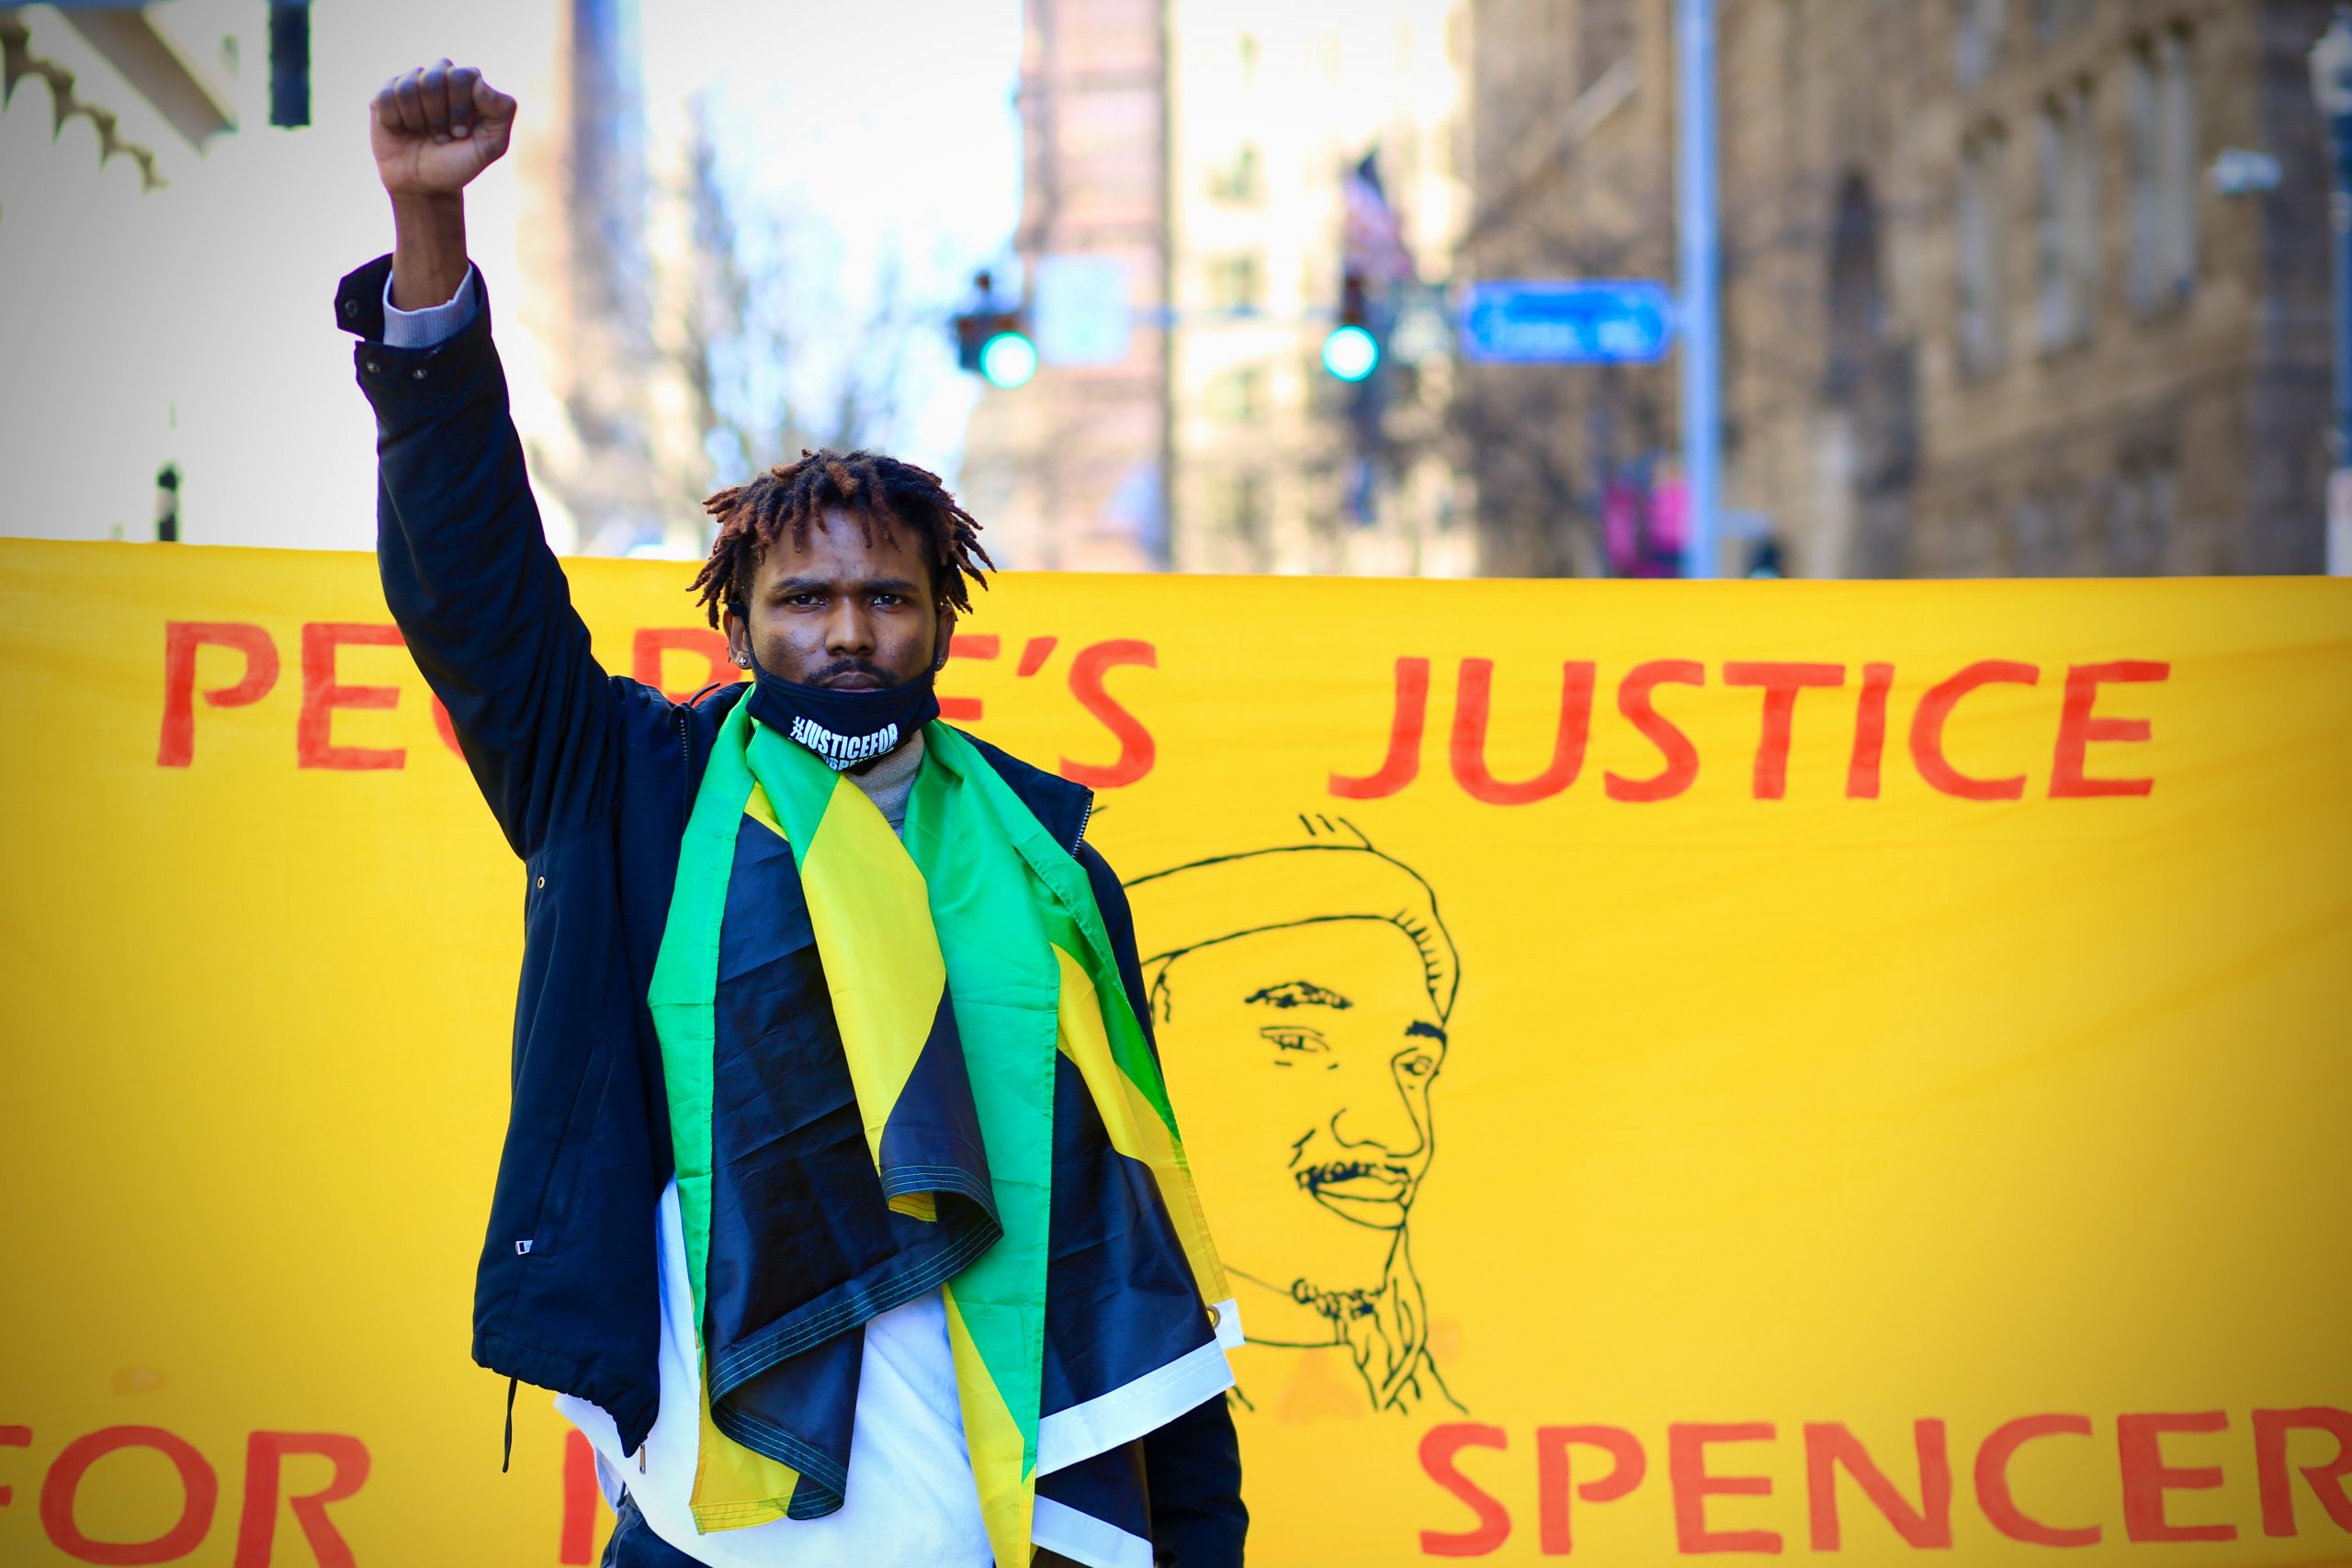 Tehilah Spencer led march in support of his brother on February 21, 2022, at 414 Grant Street. Photo Credit: Emmai Alaquiva